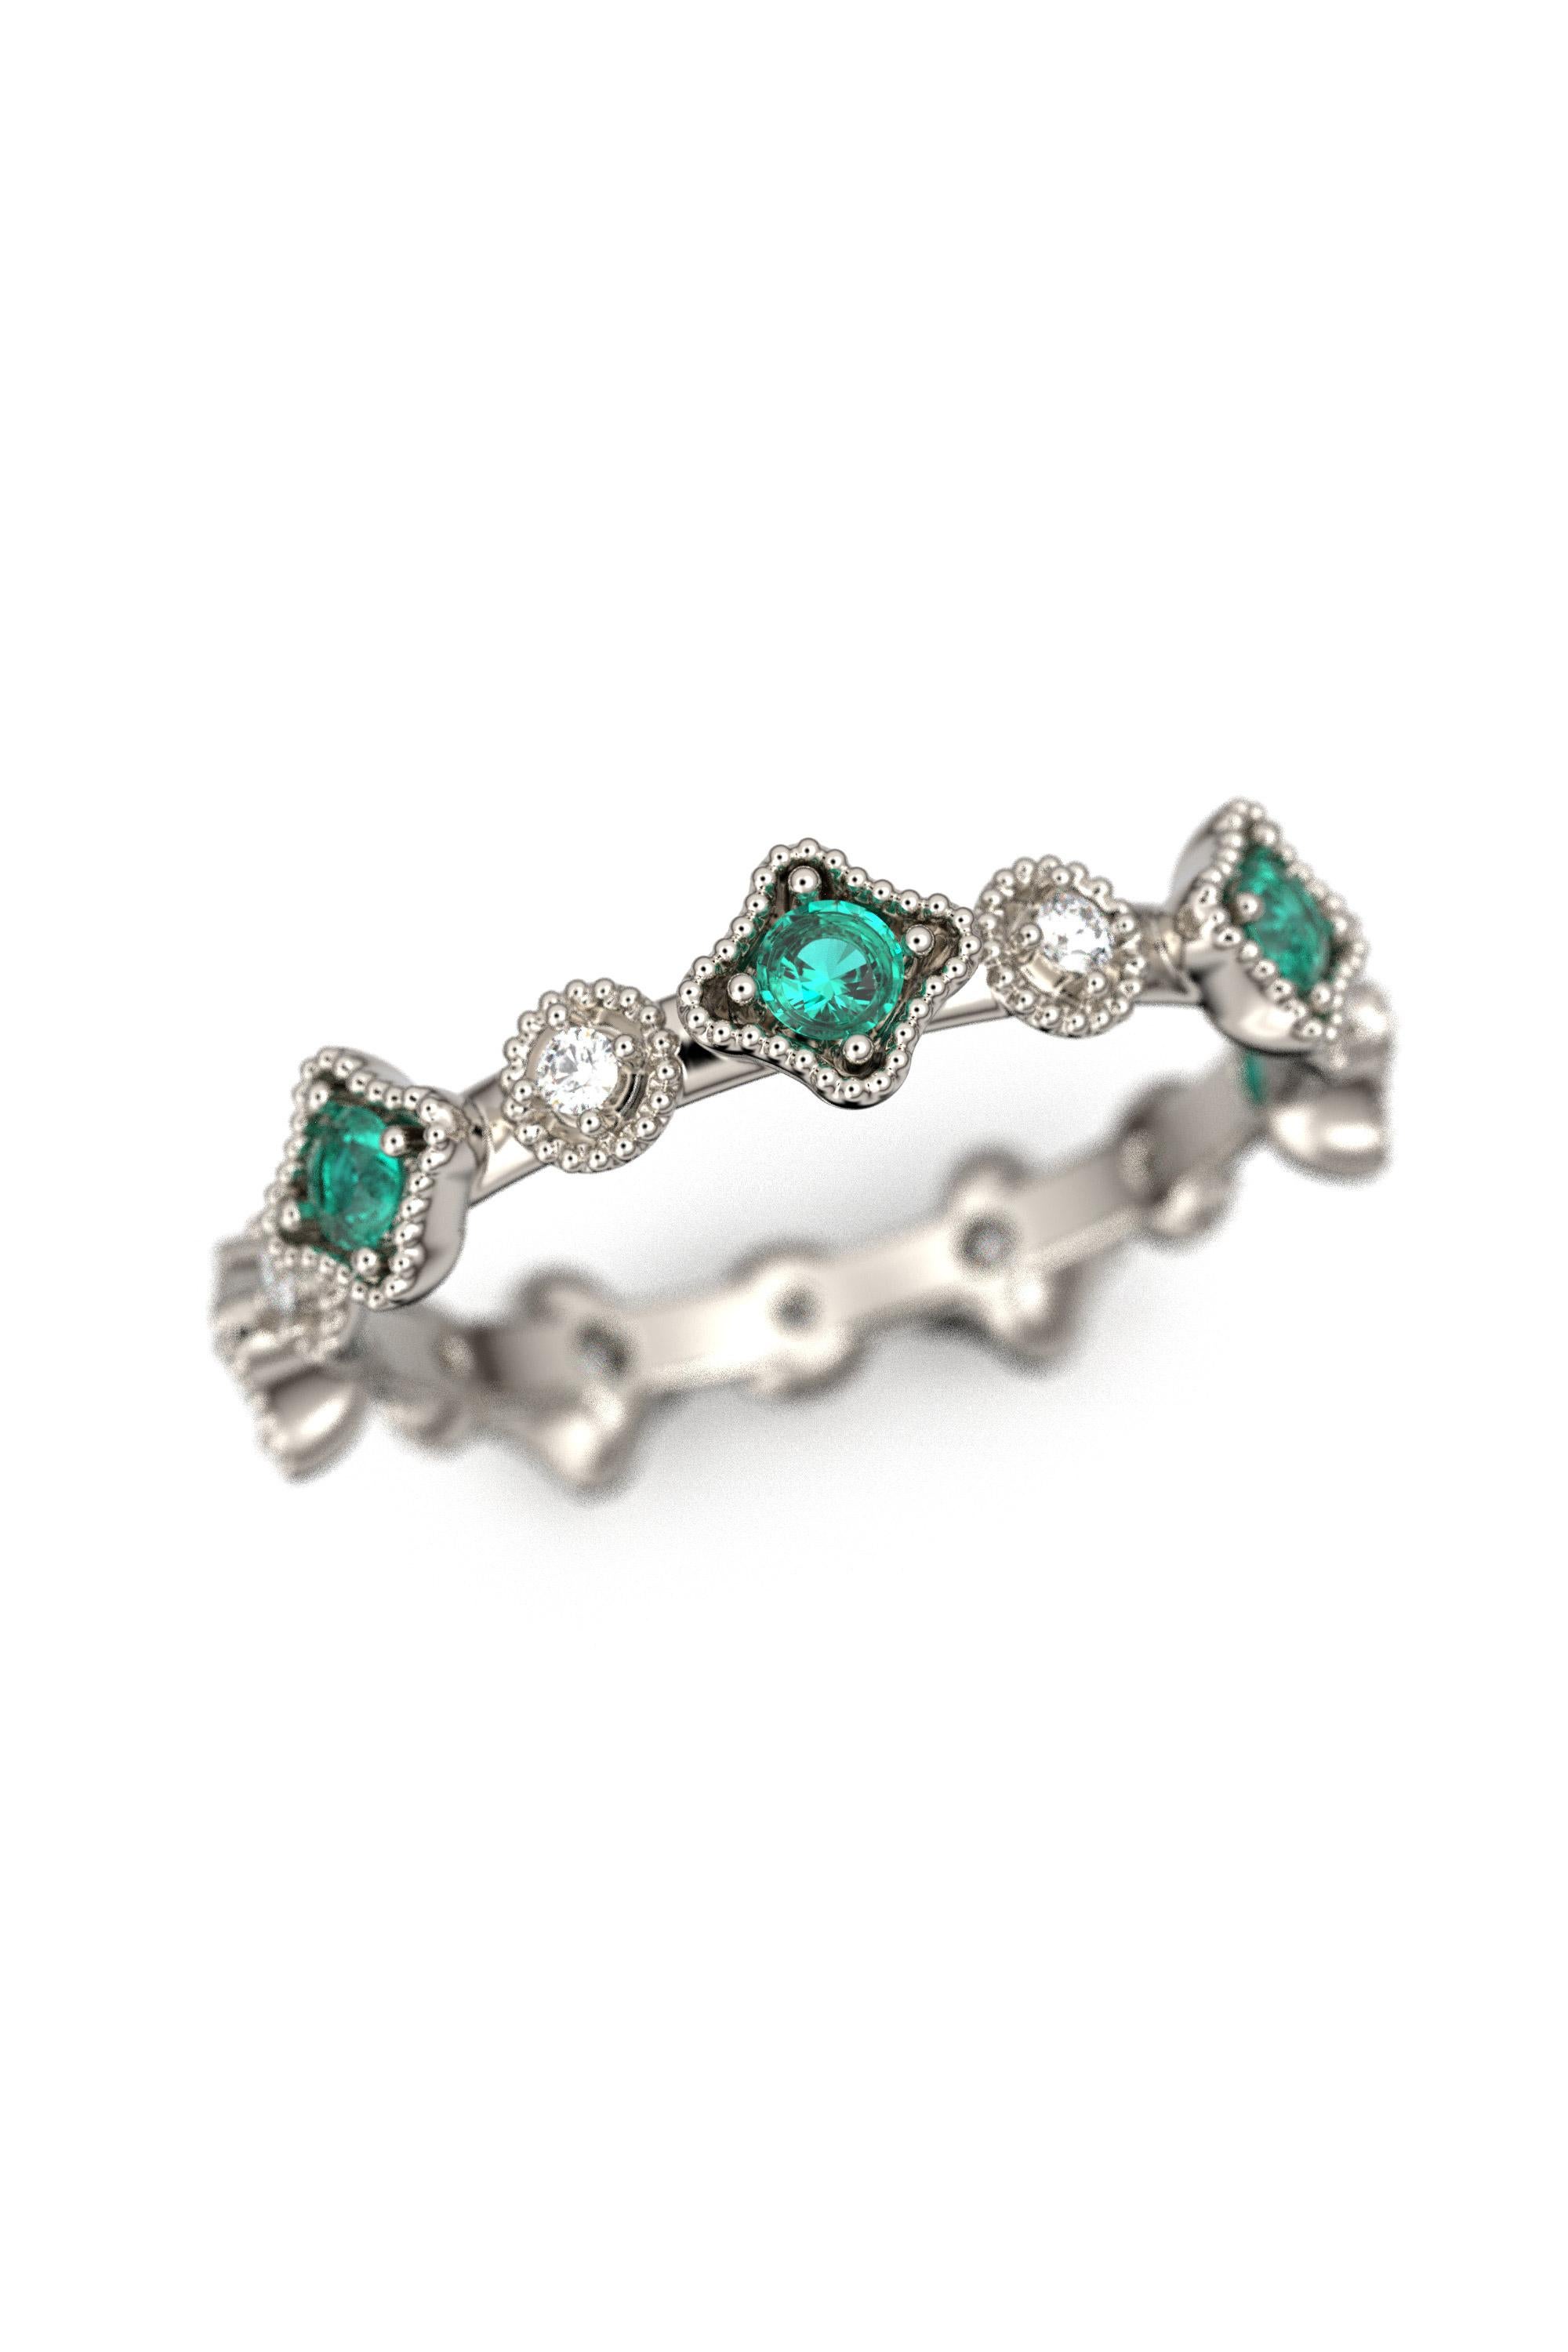 For Sale:  18k Gold Eternity Band with Natural Emerald and Diamonds, Made in Italy Jewelry 11